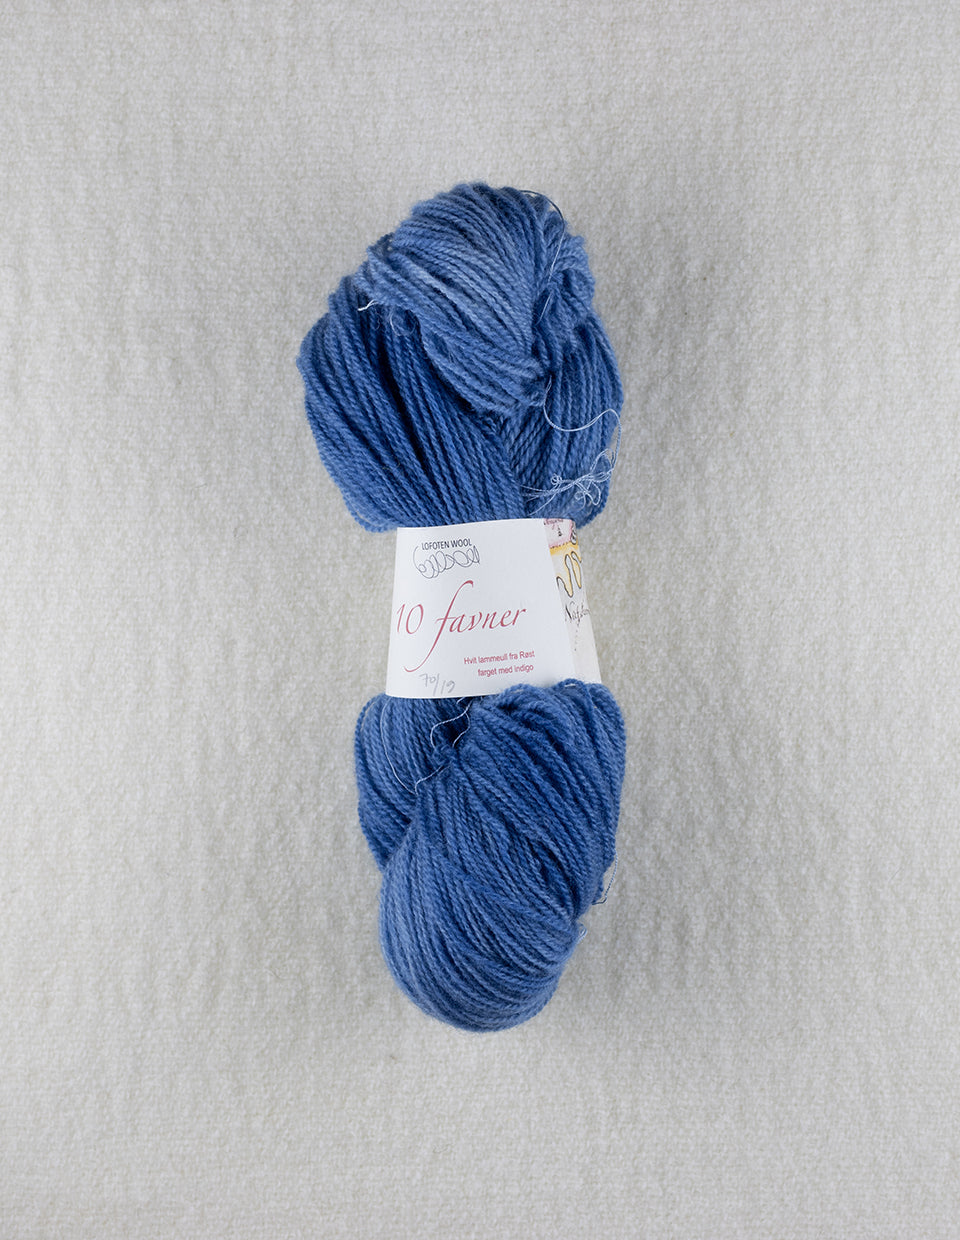 ANNA, 2-ply Uttakleiv with plant-dyed, knitting kit